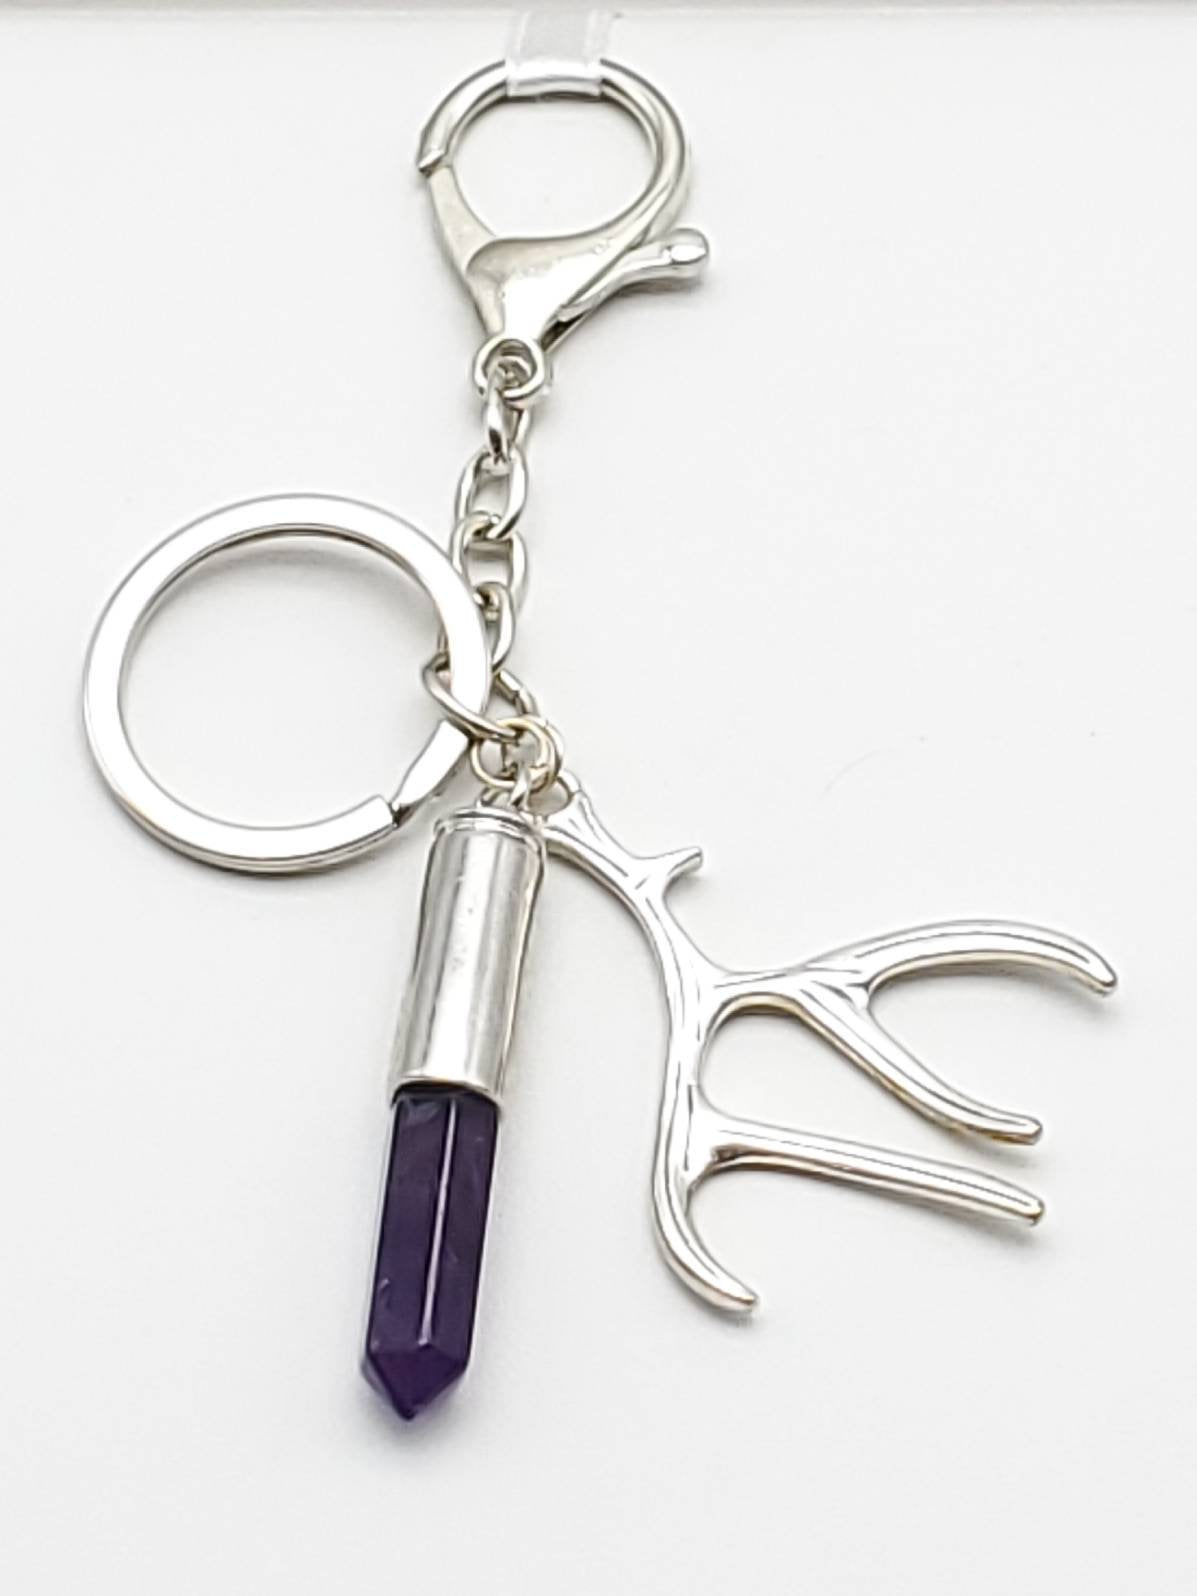 Keychain with Amethyst Crystal and Antler Charm - The Caffeinated Raven